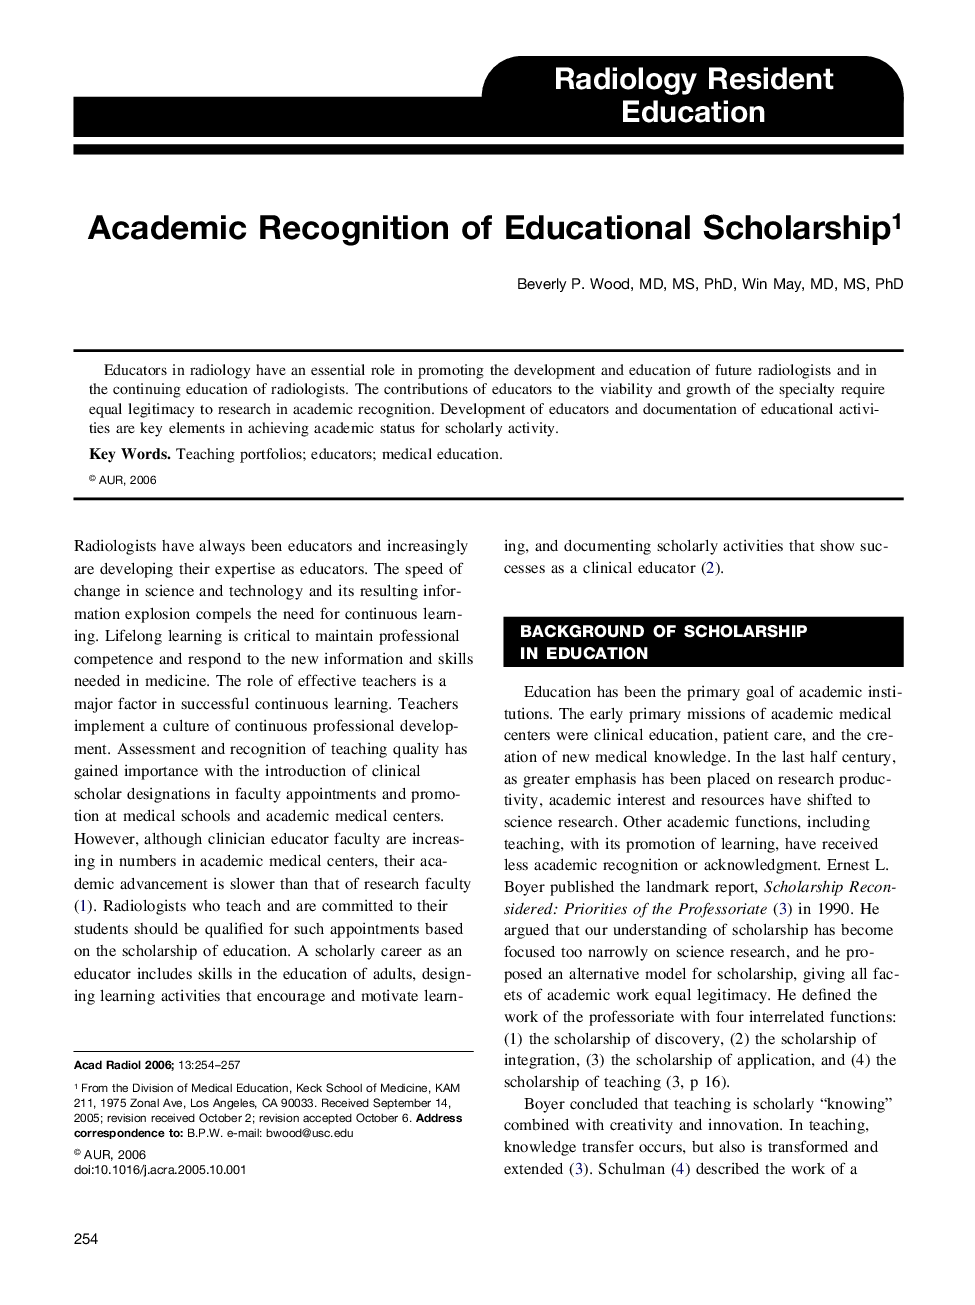 Academic Recognition of Educational Scholarship